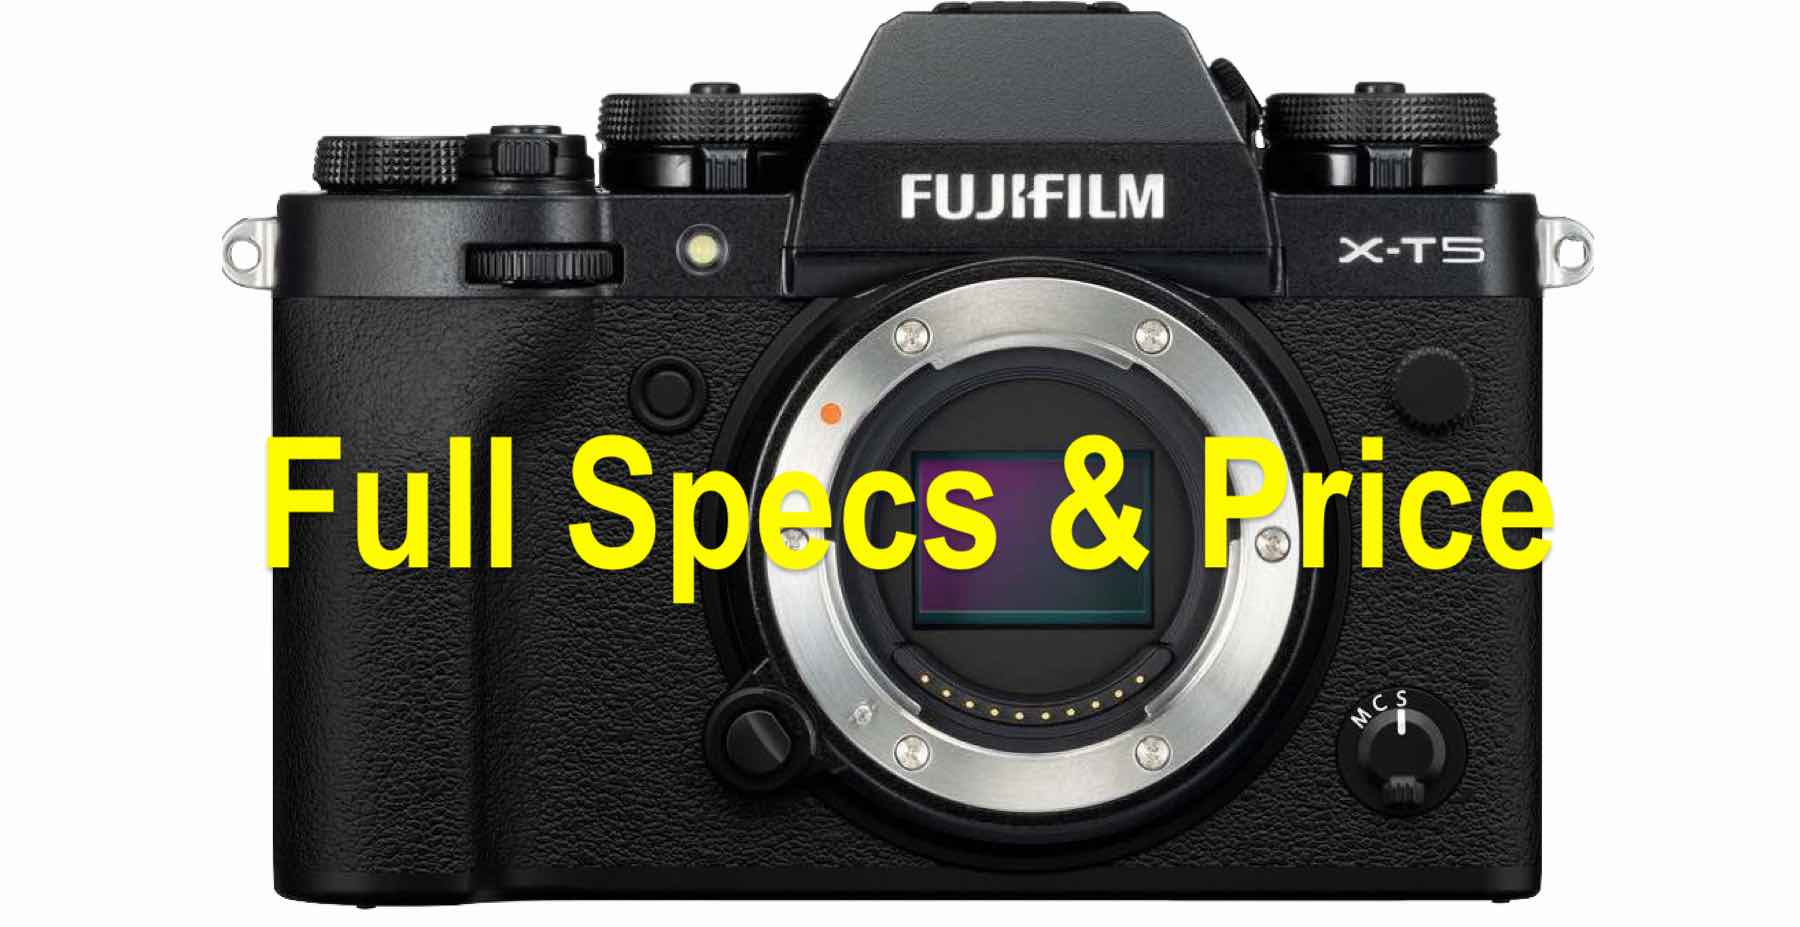 News - The New Fujifilm X-T5: What Stories Are Made Of - Looking